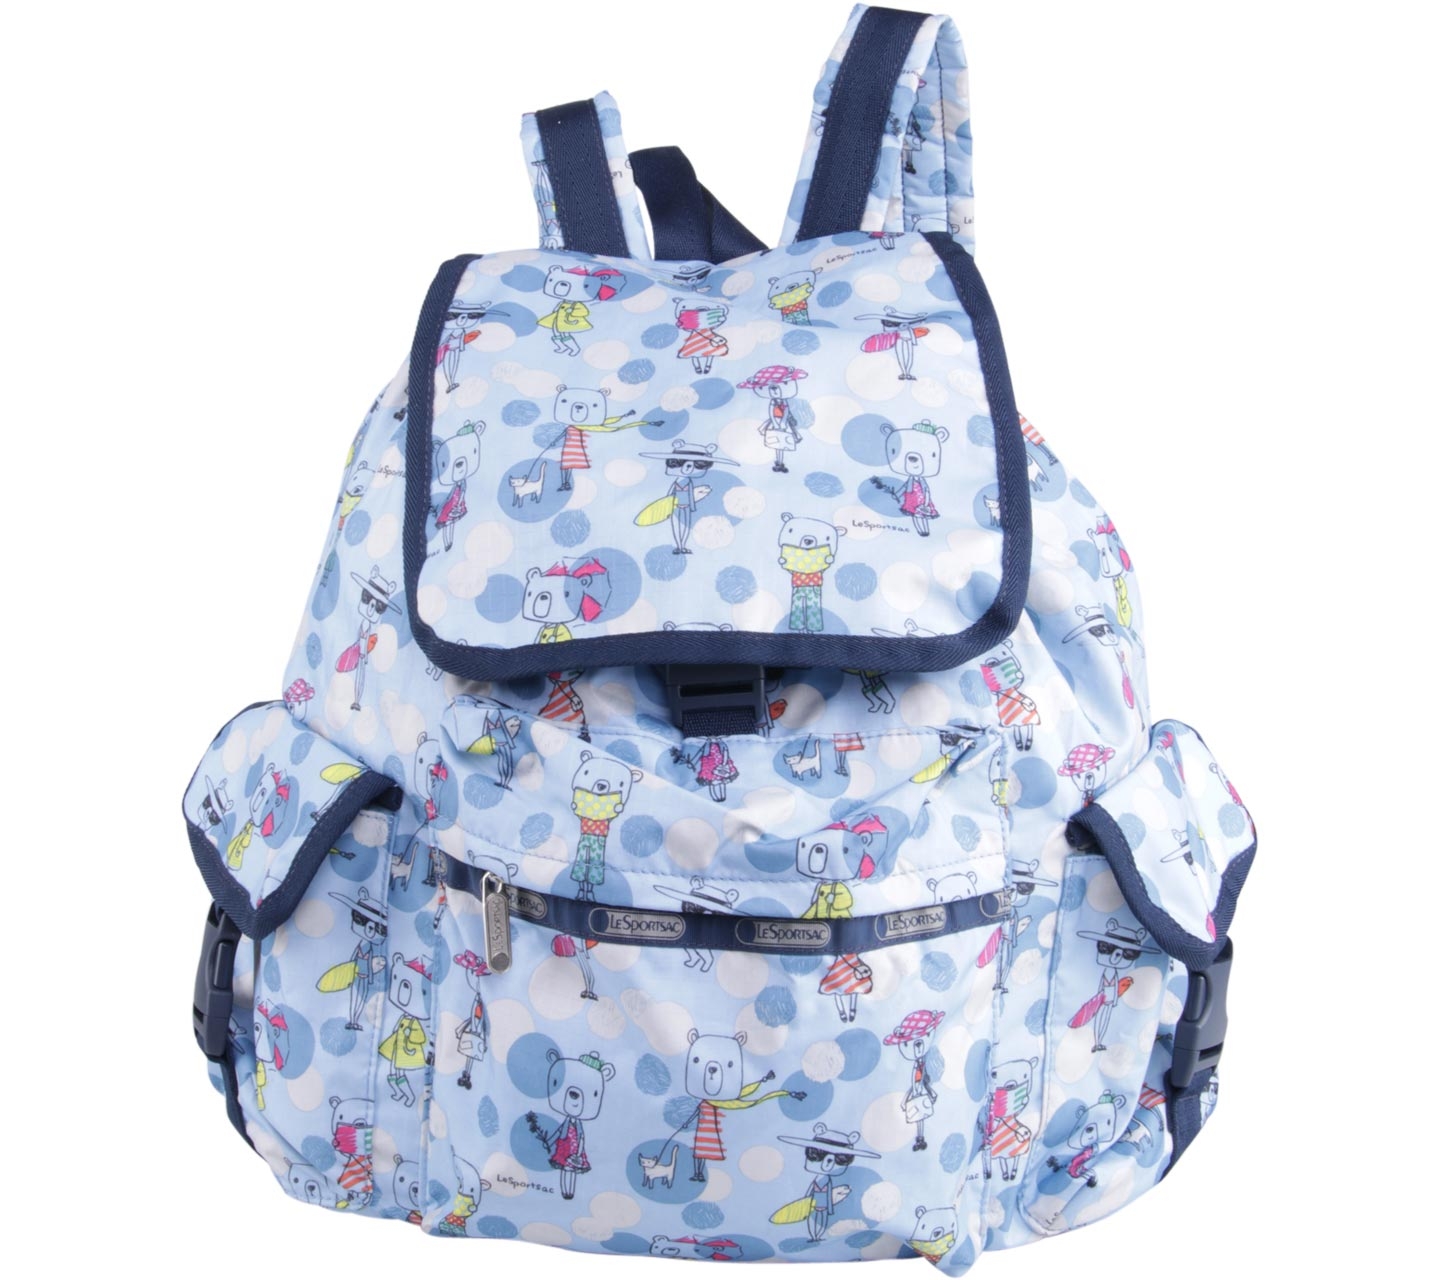 Le Sportsac Blue Patterned Backpack